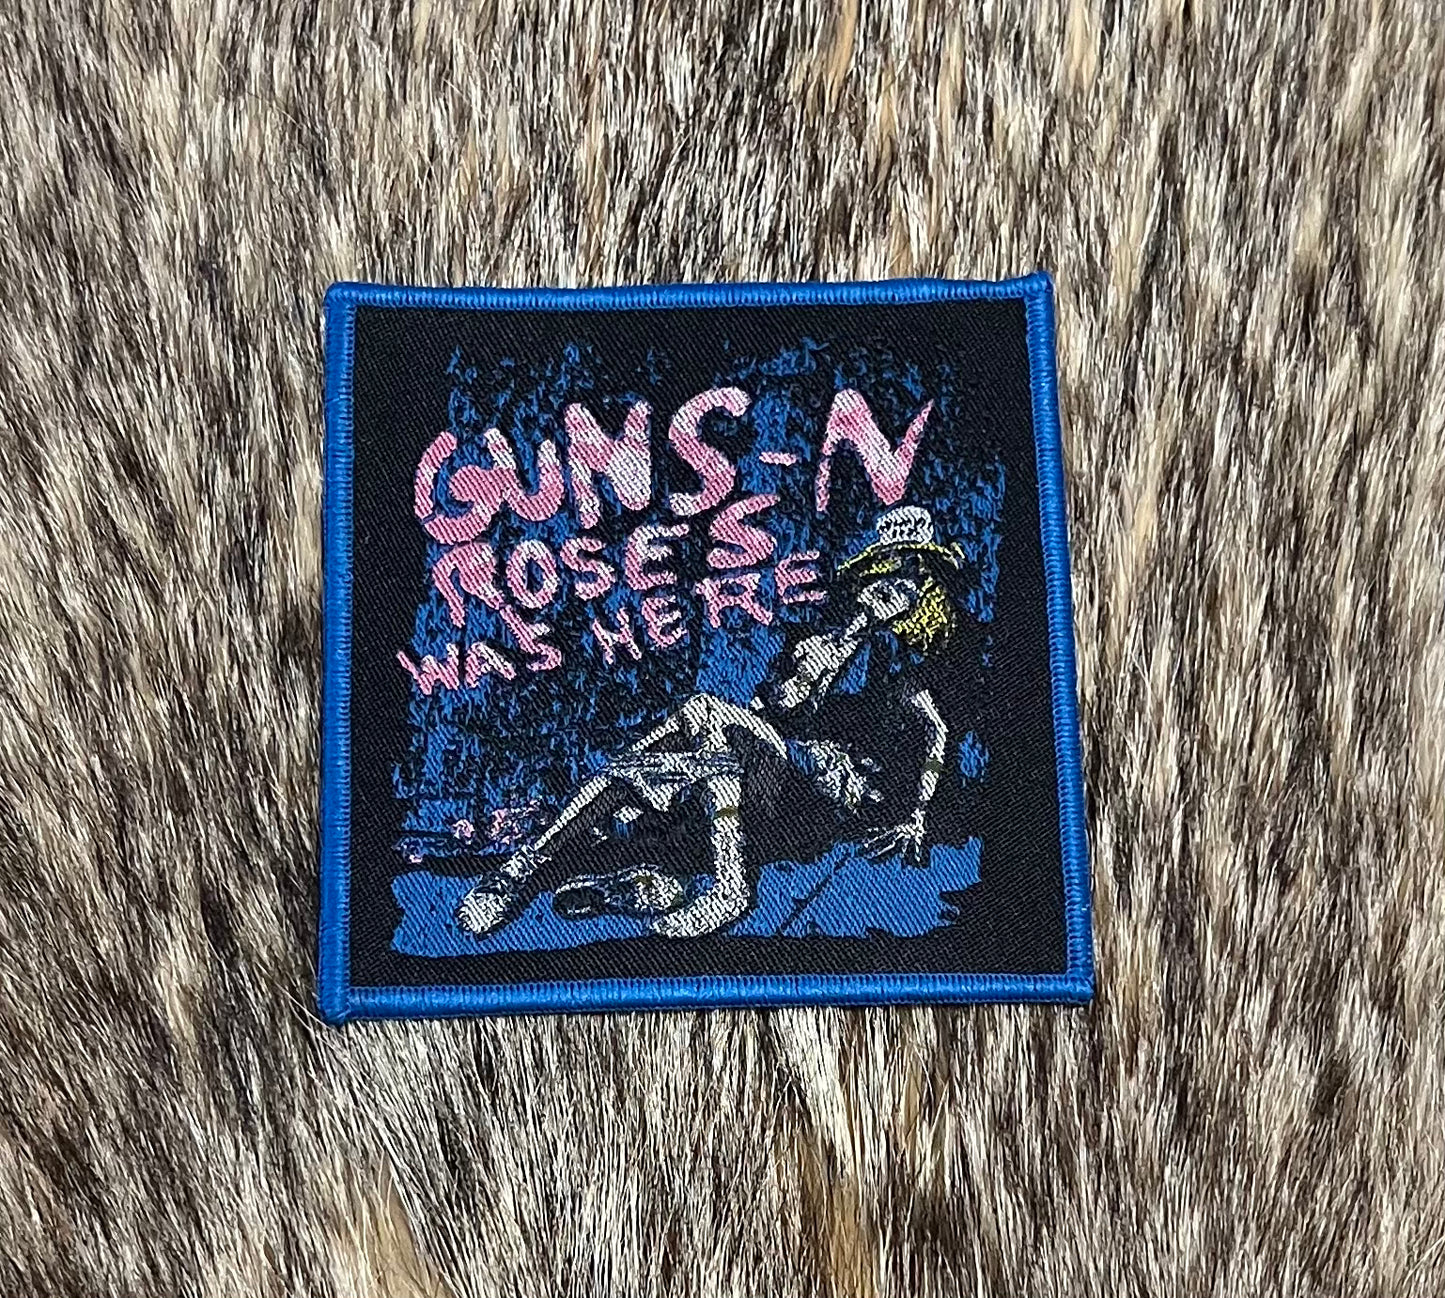 Guns N Roses - Was Here Patch